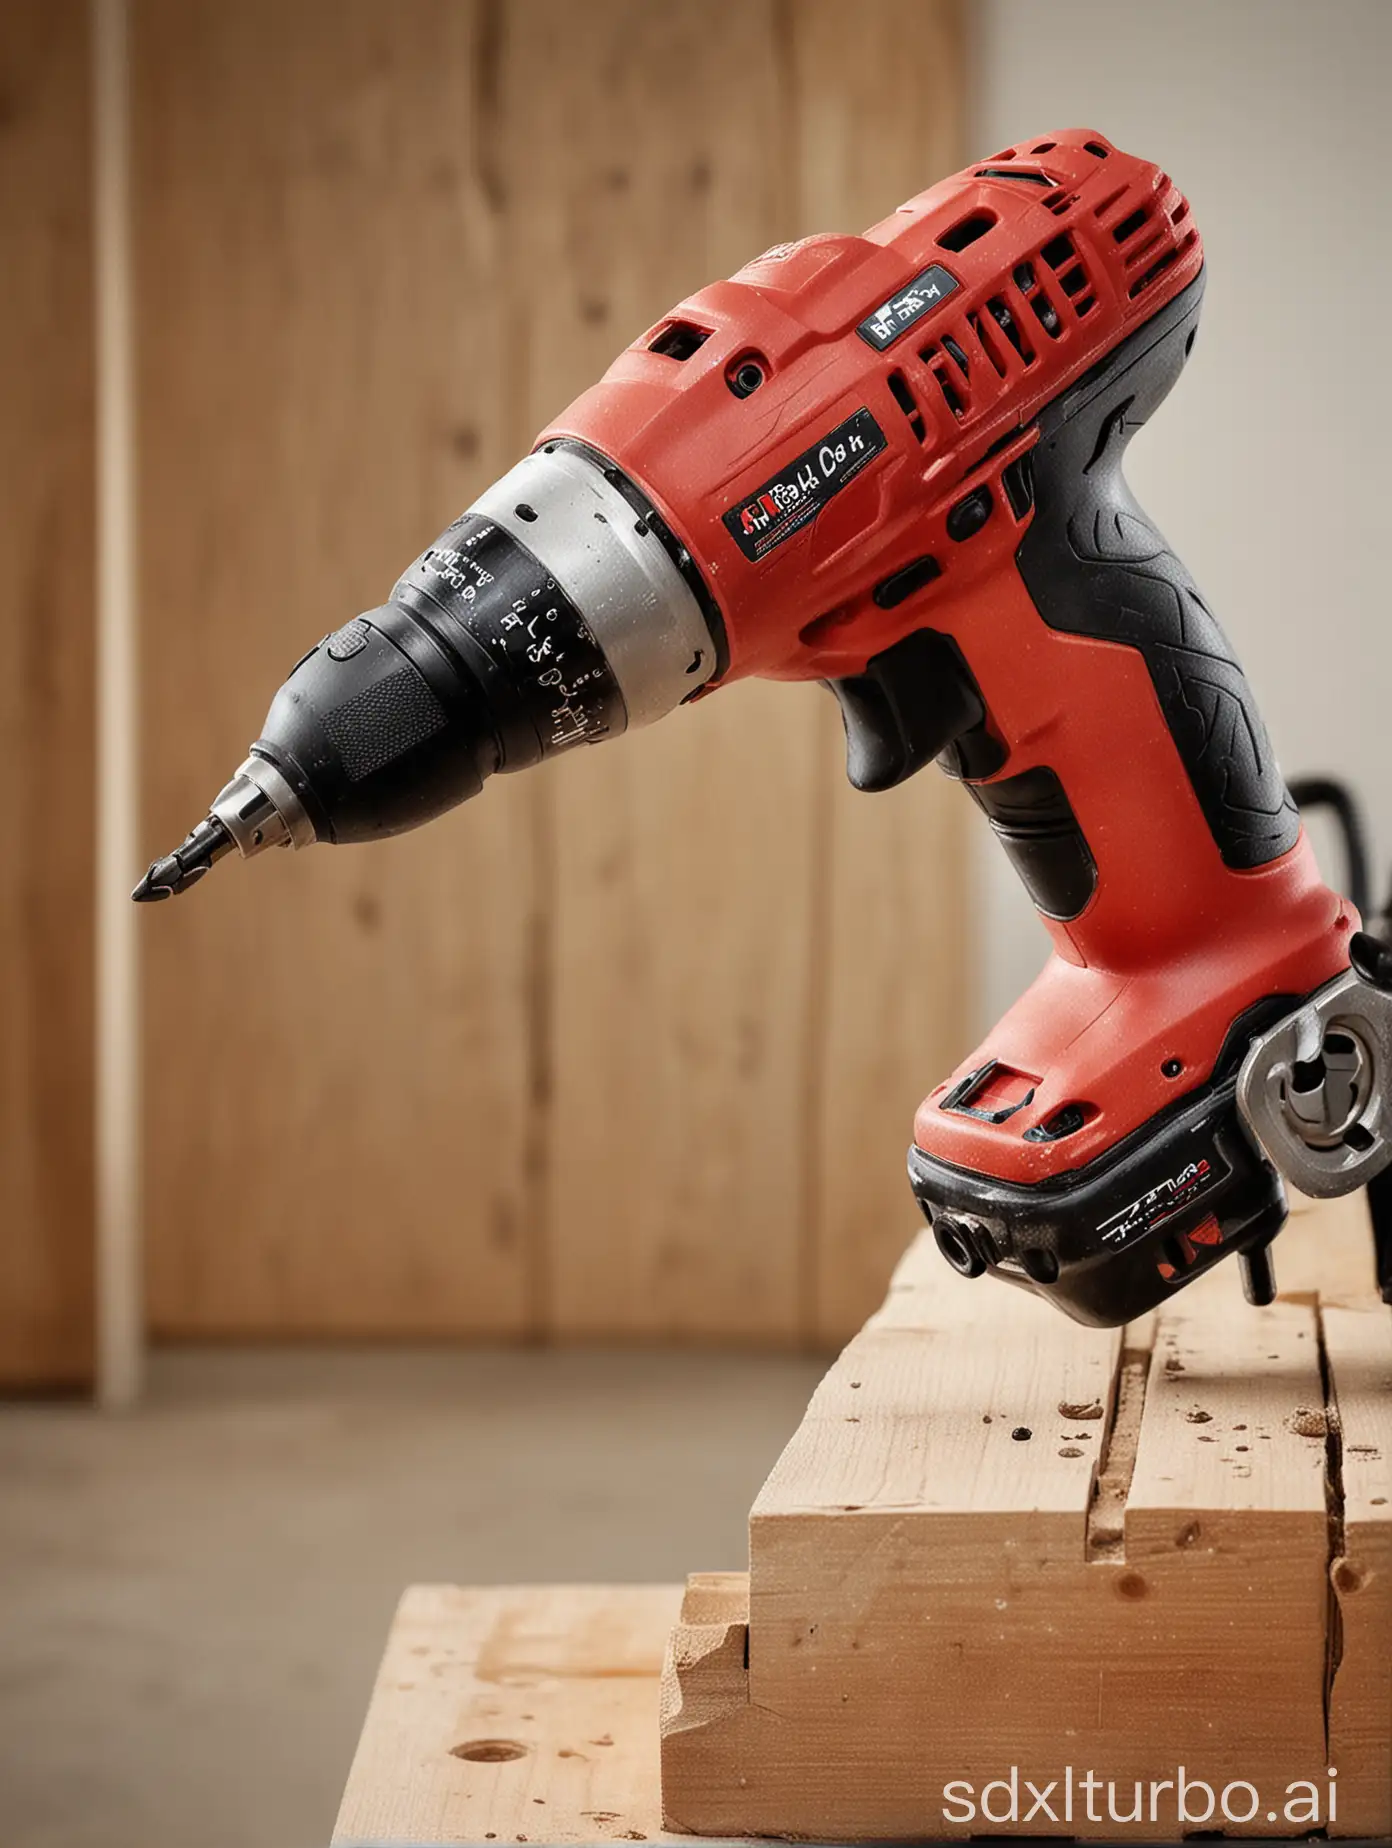 A close-up of a power tool, such as a drill or a saw, with its name and price prominently displayed. The tool should be well-lit and in pristine condition, and the background should be clean and uncluttered.